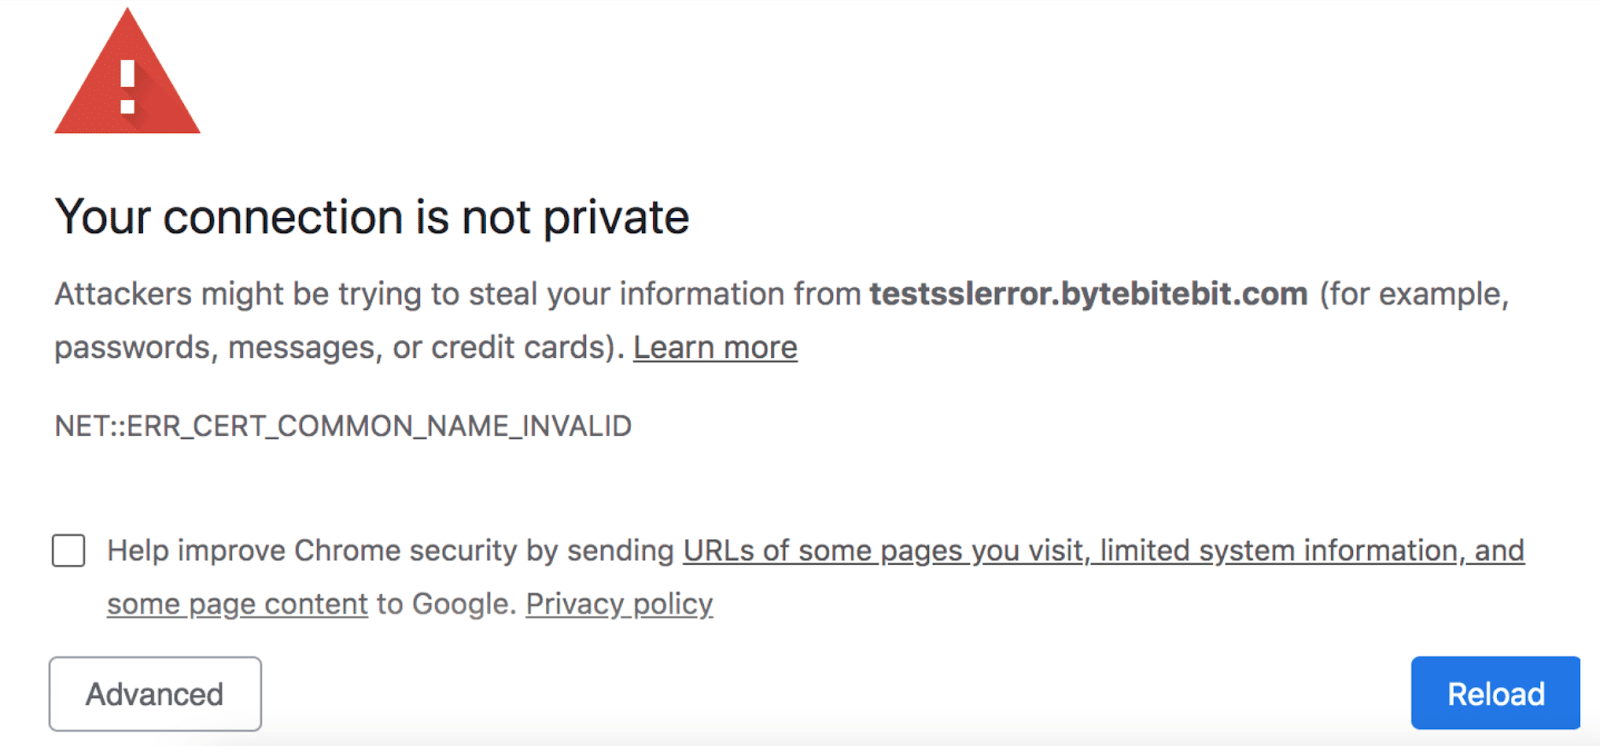 "Your connection is not private" error